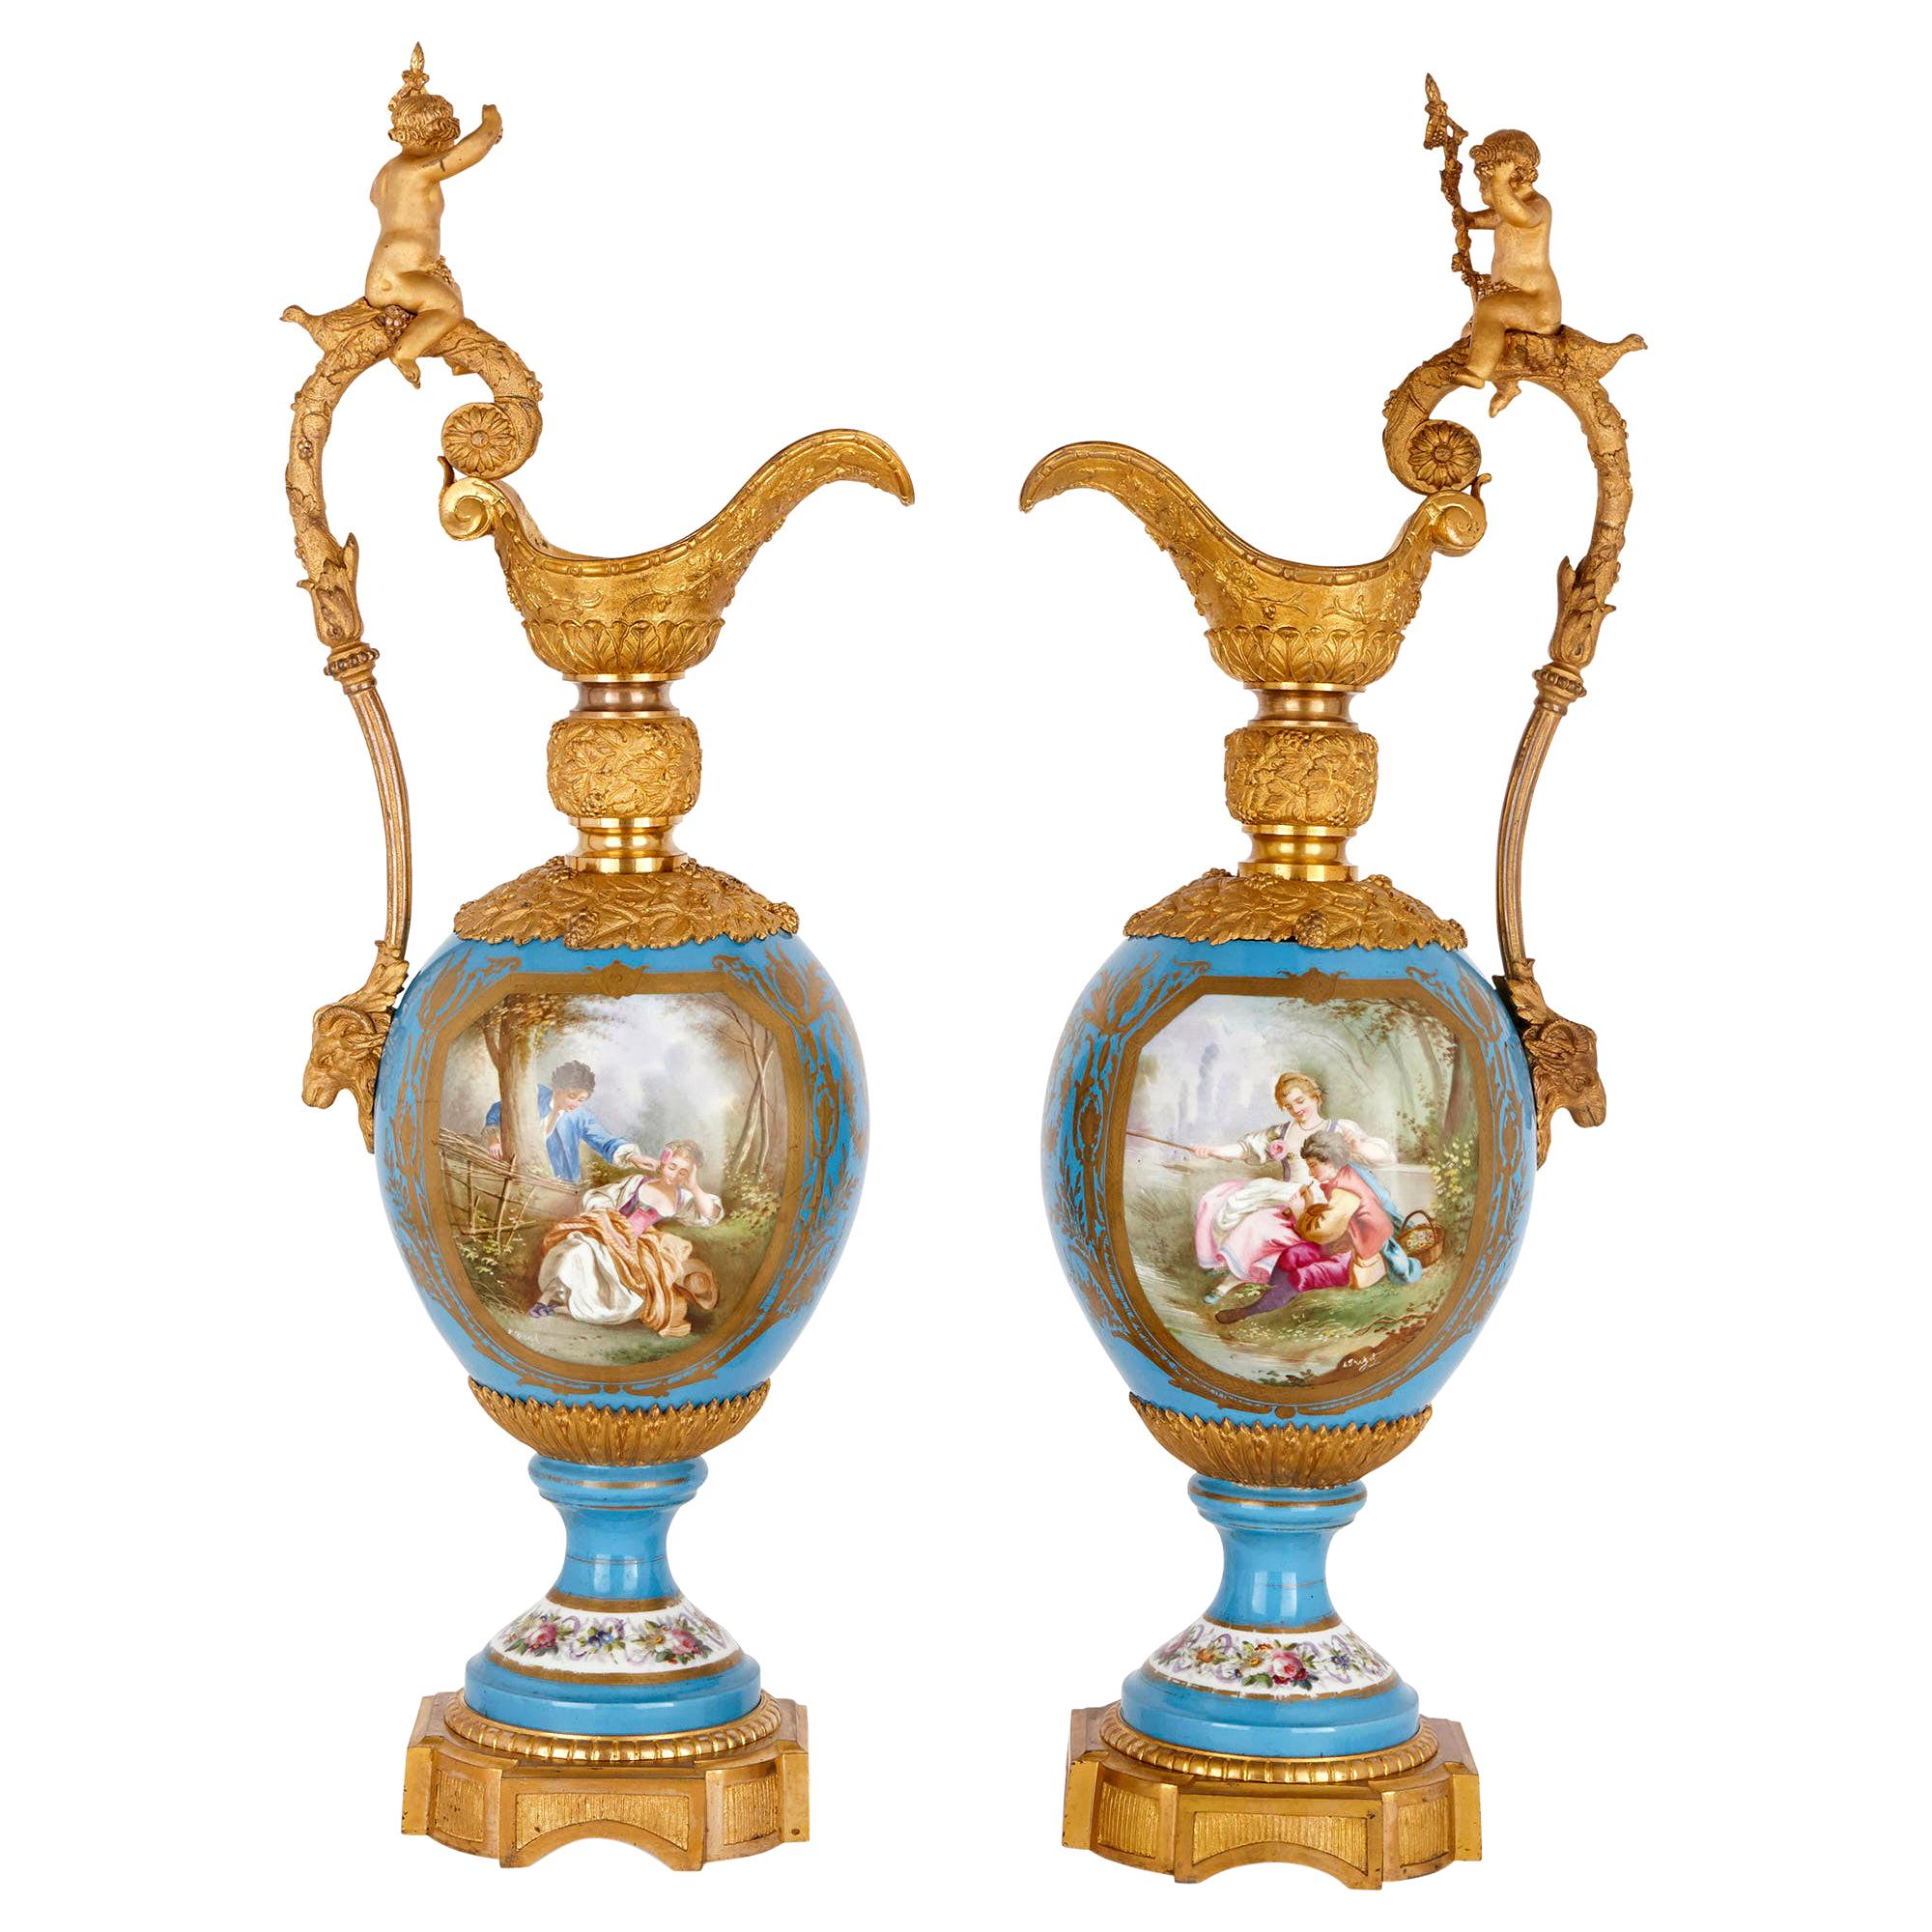 Two Large Rococo Style Porcelain and Gilt Bronze Jugs